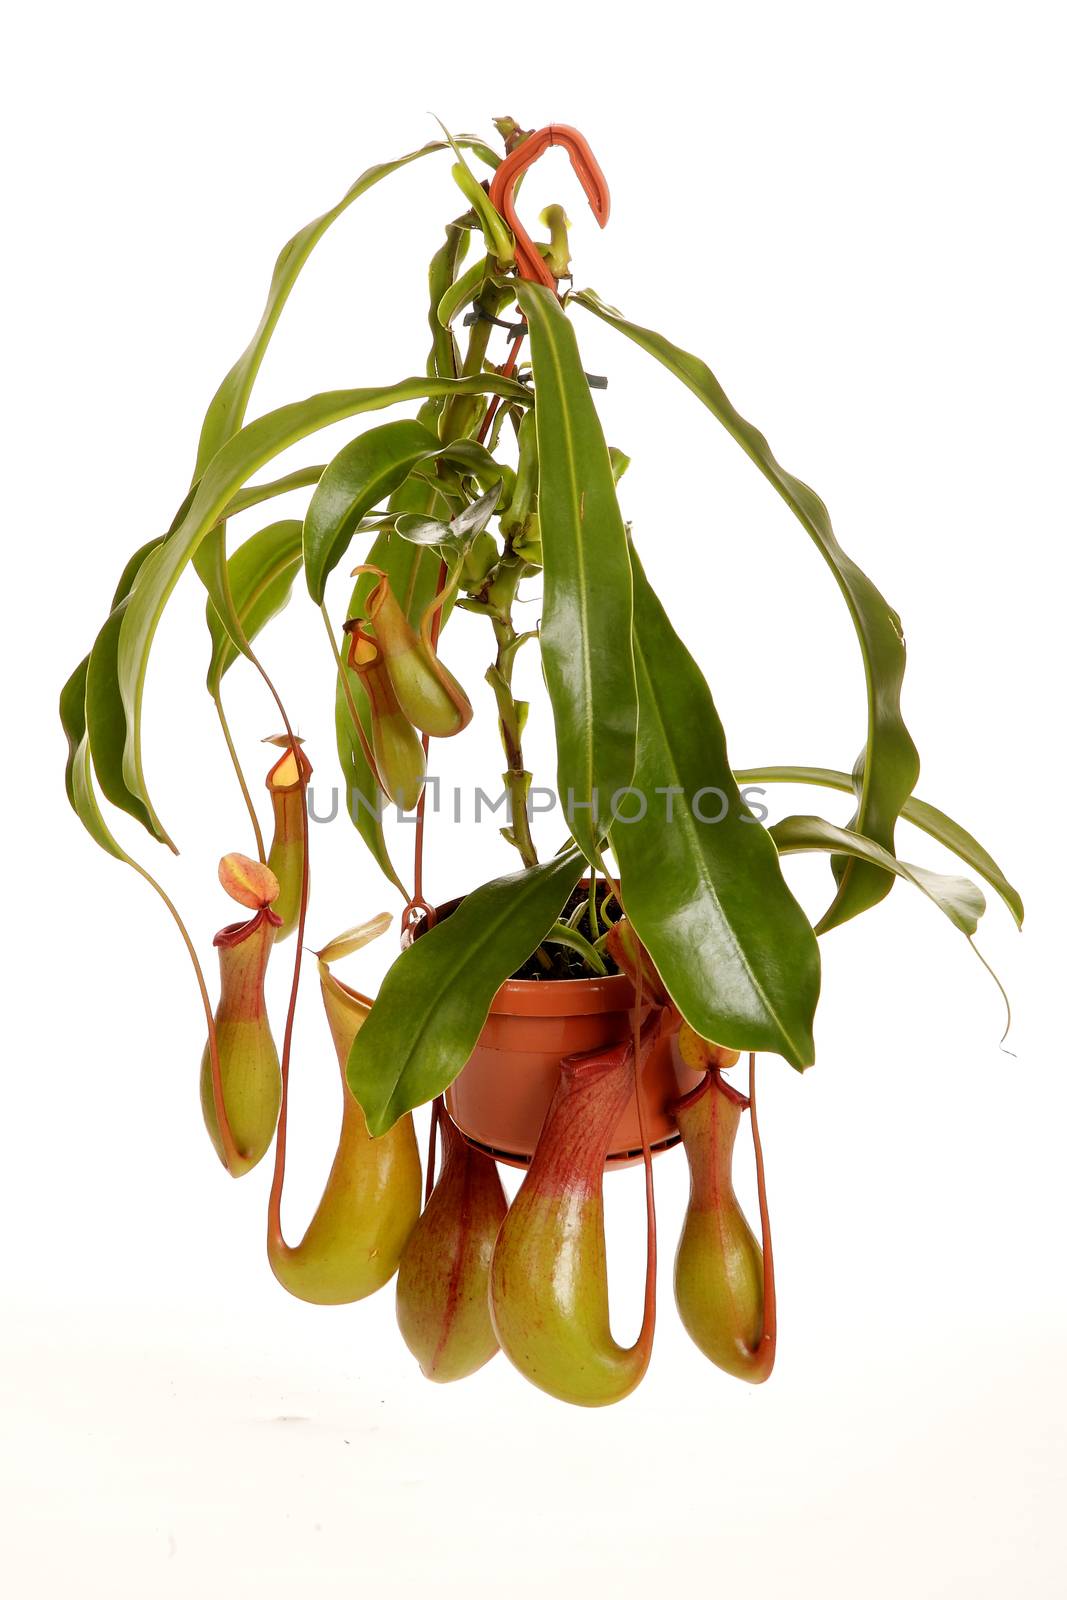 Nepenthe tropical carnivore plant on an isolated white background